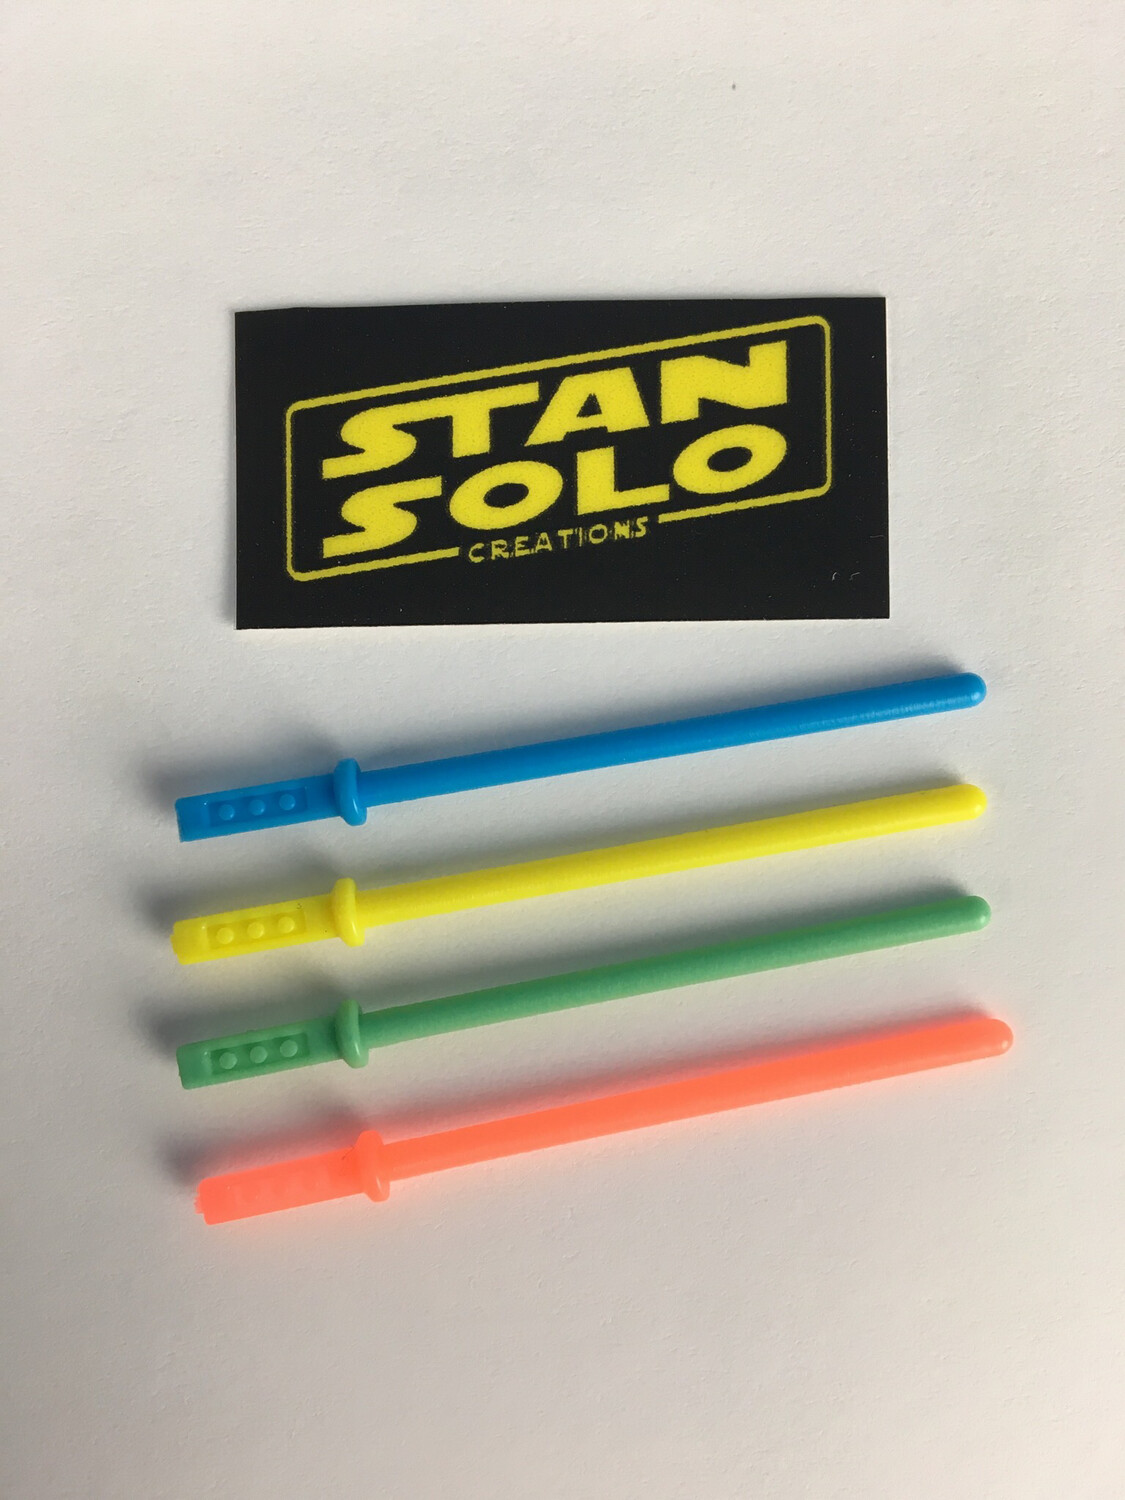 Stan Solo Creations Jedi Lightsabers Set Of 4